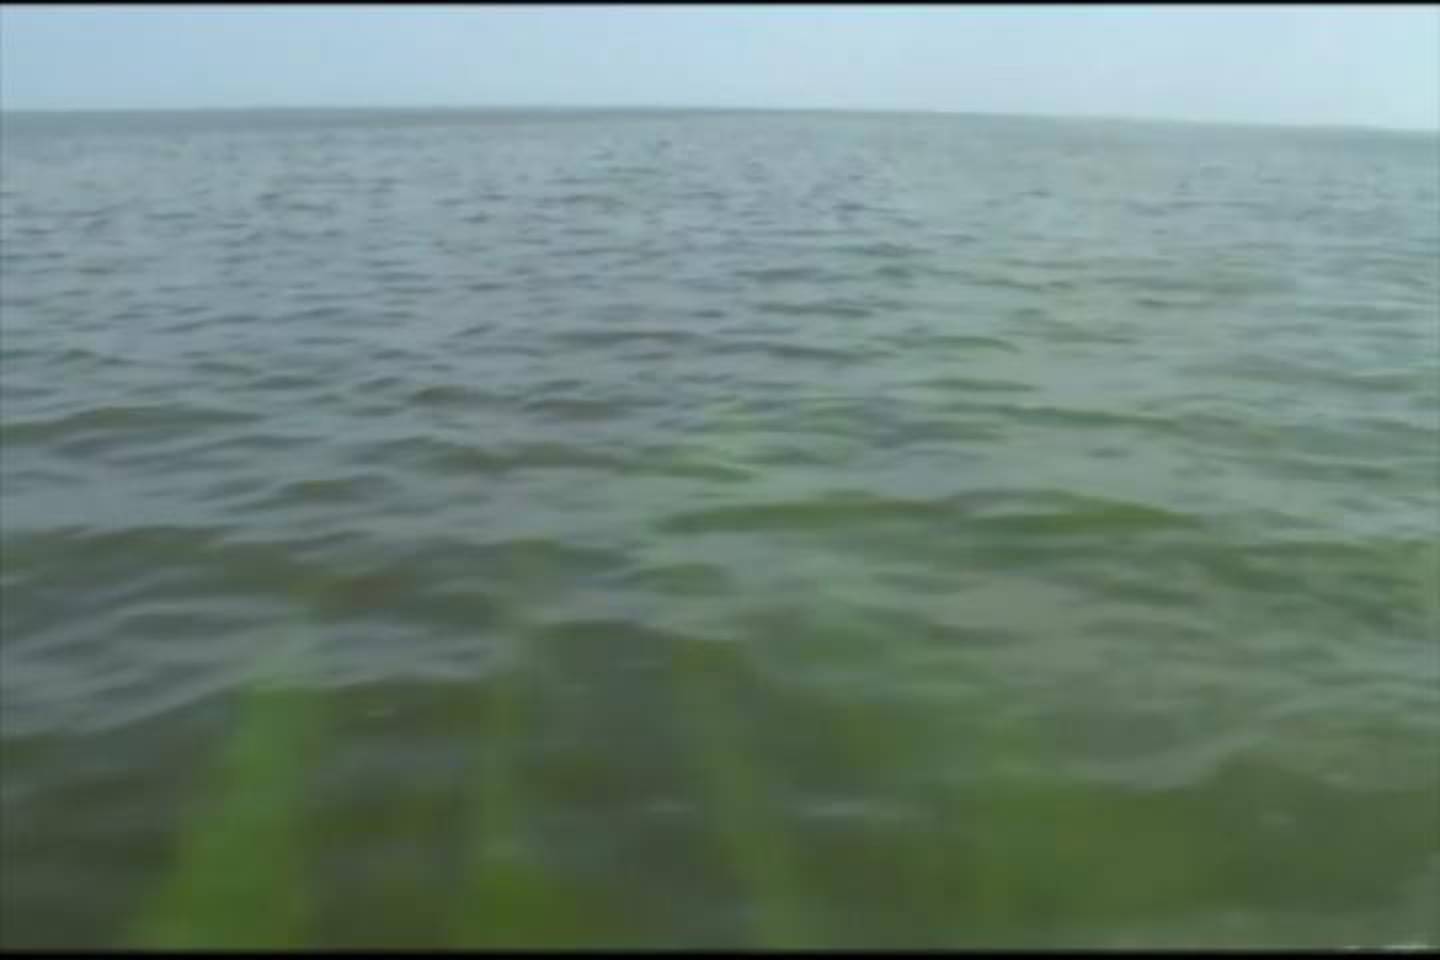 Promo Image: Lake Erie Expected to Have Potentially Harmful Algae Bloom